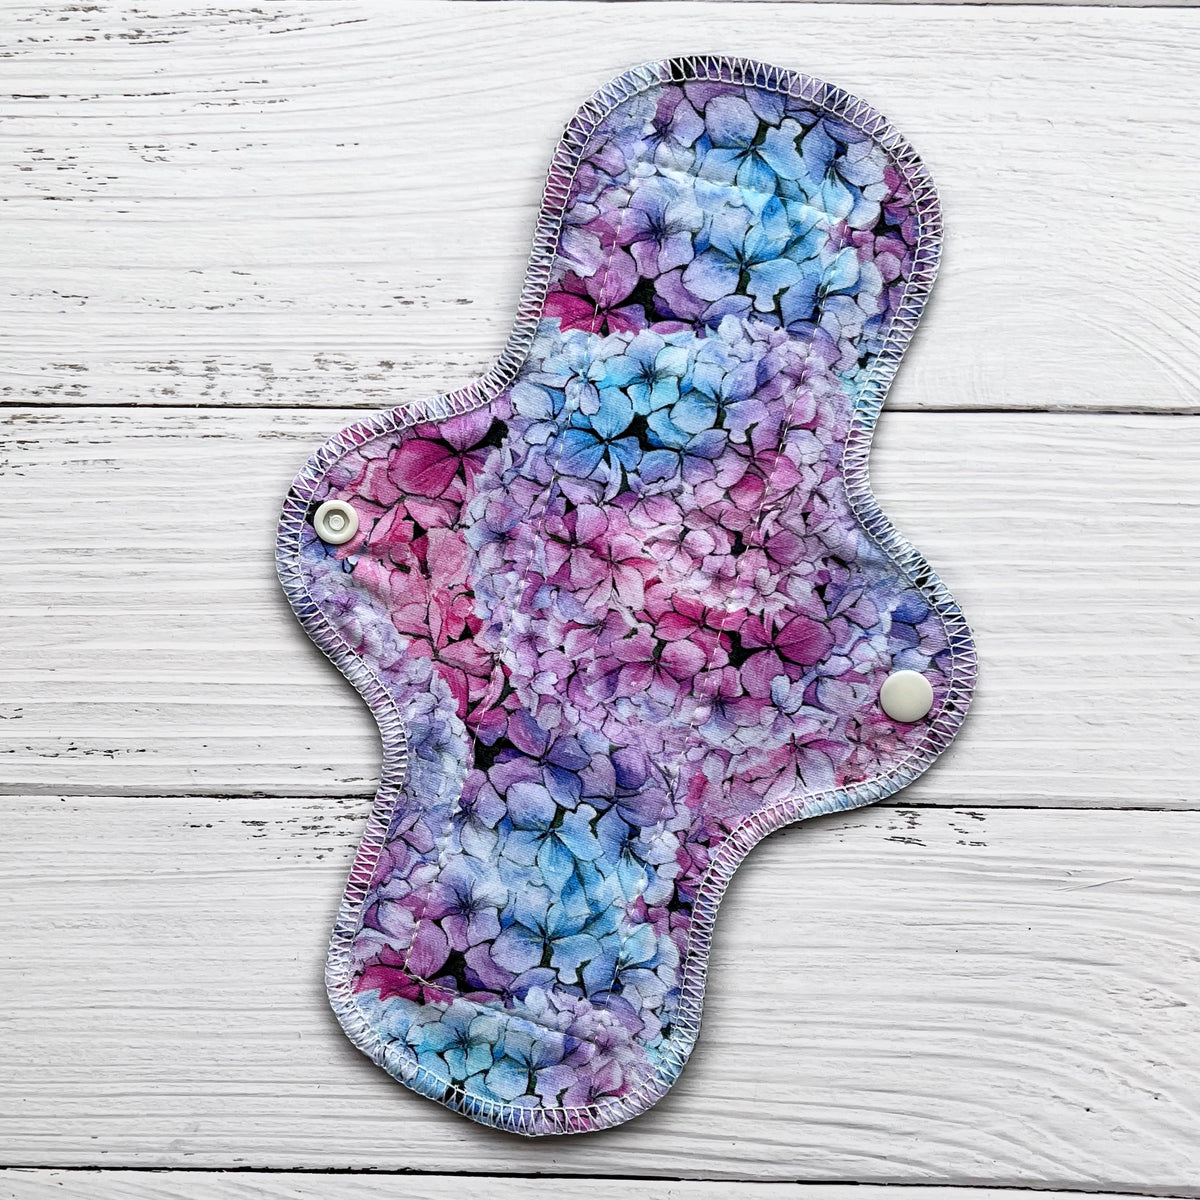 10 inch long reusable pad with a blue pink and purple hydrangea print on a rustic wood background